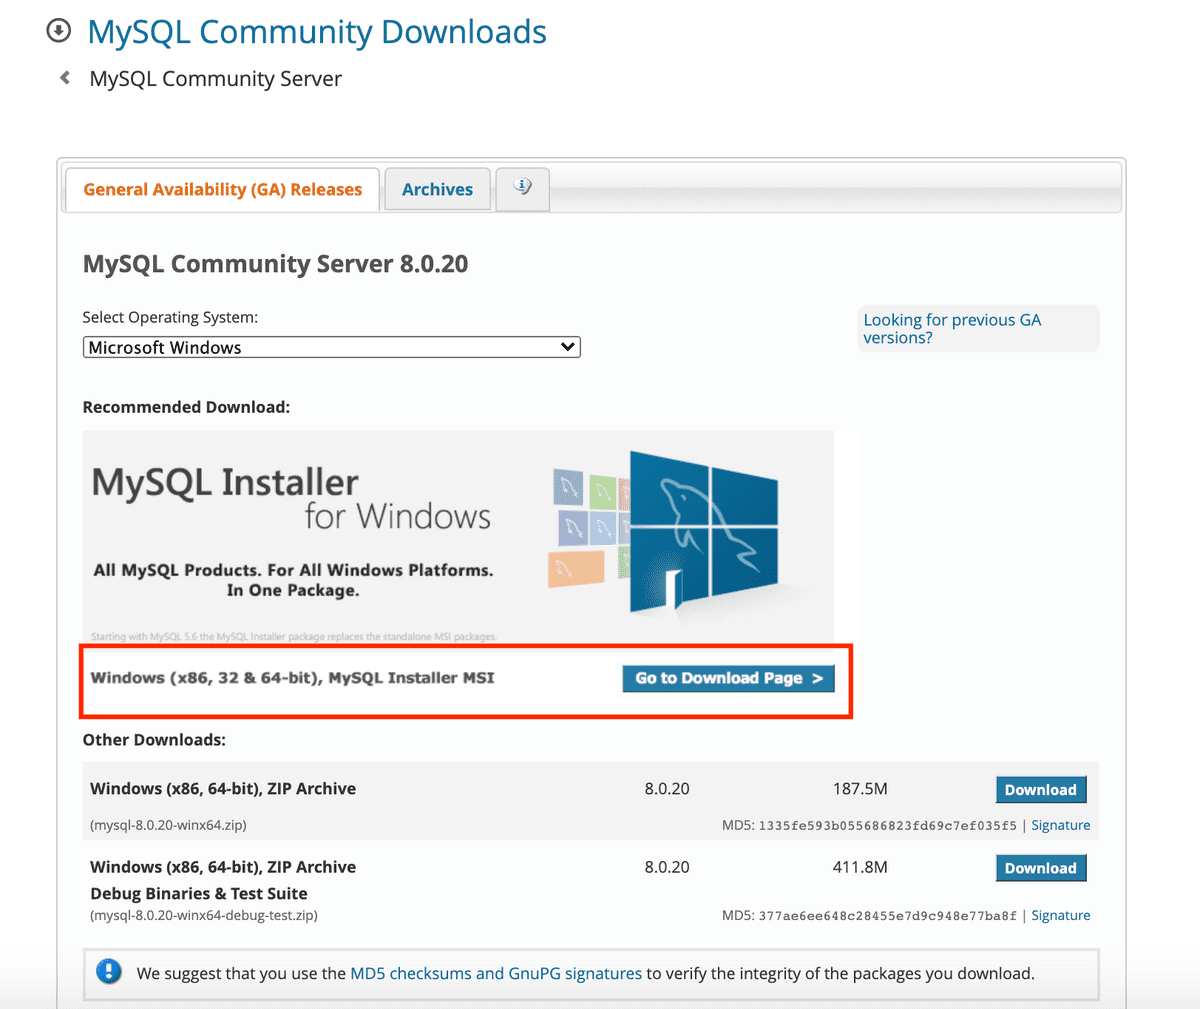 On the MySQL Community Downloads page, a red box outlines "Windows (x86, 32 & 64-bit), MySQL Installer MSI" and a blue "Go to Download Page" button.